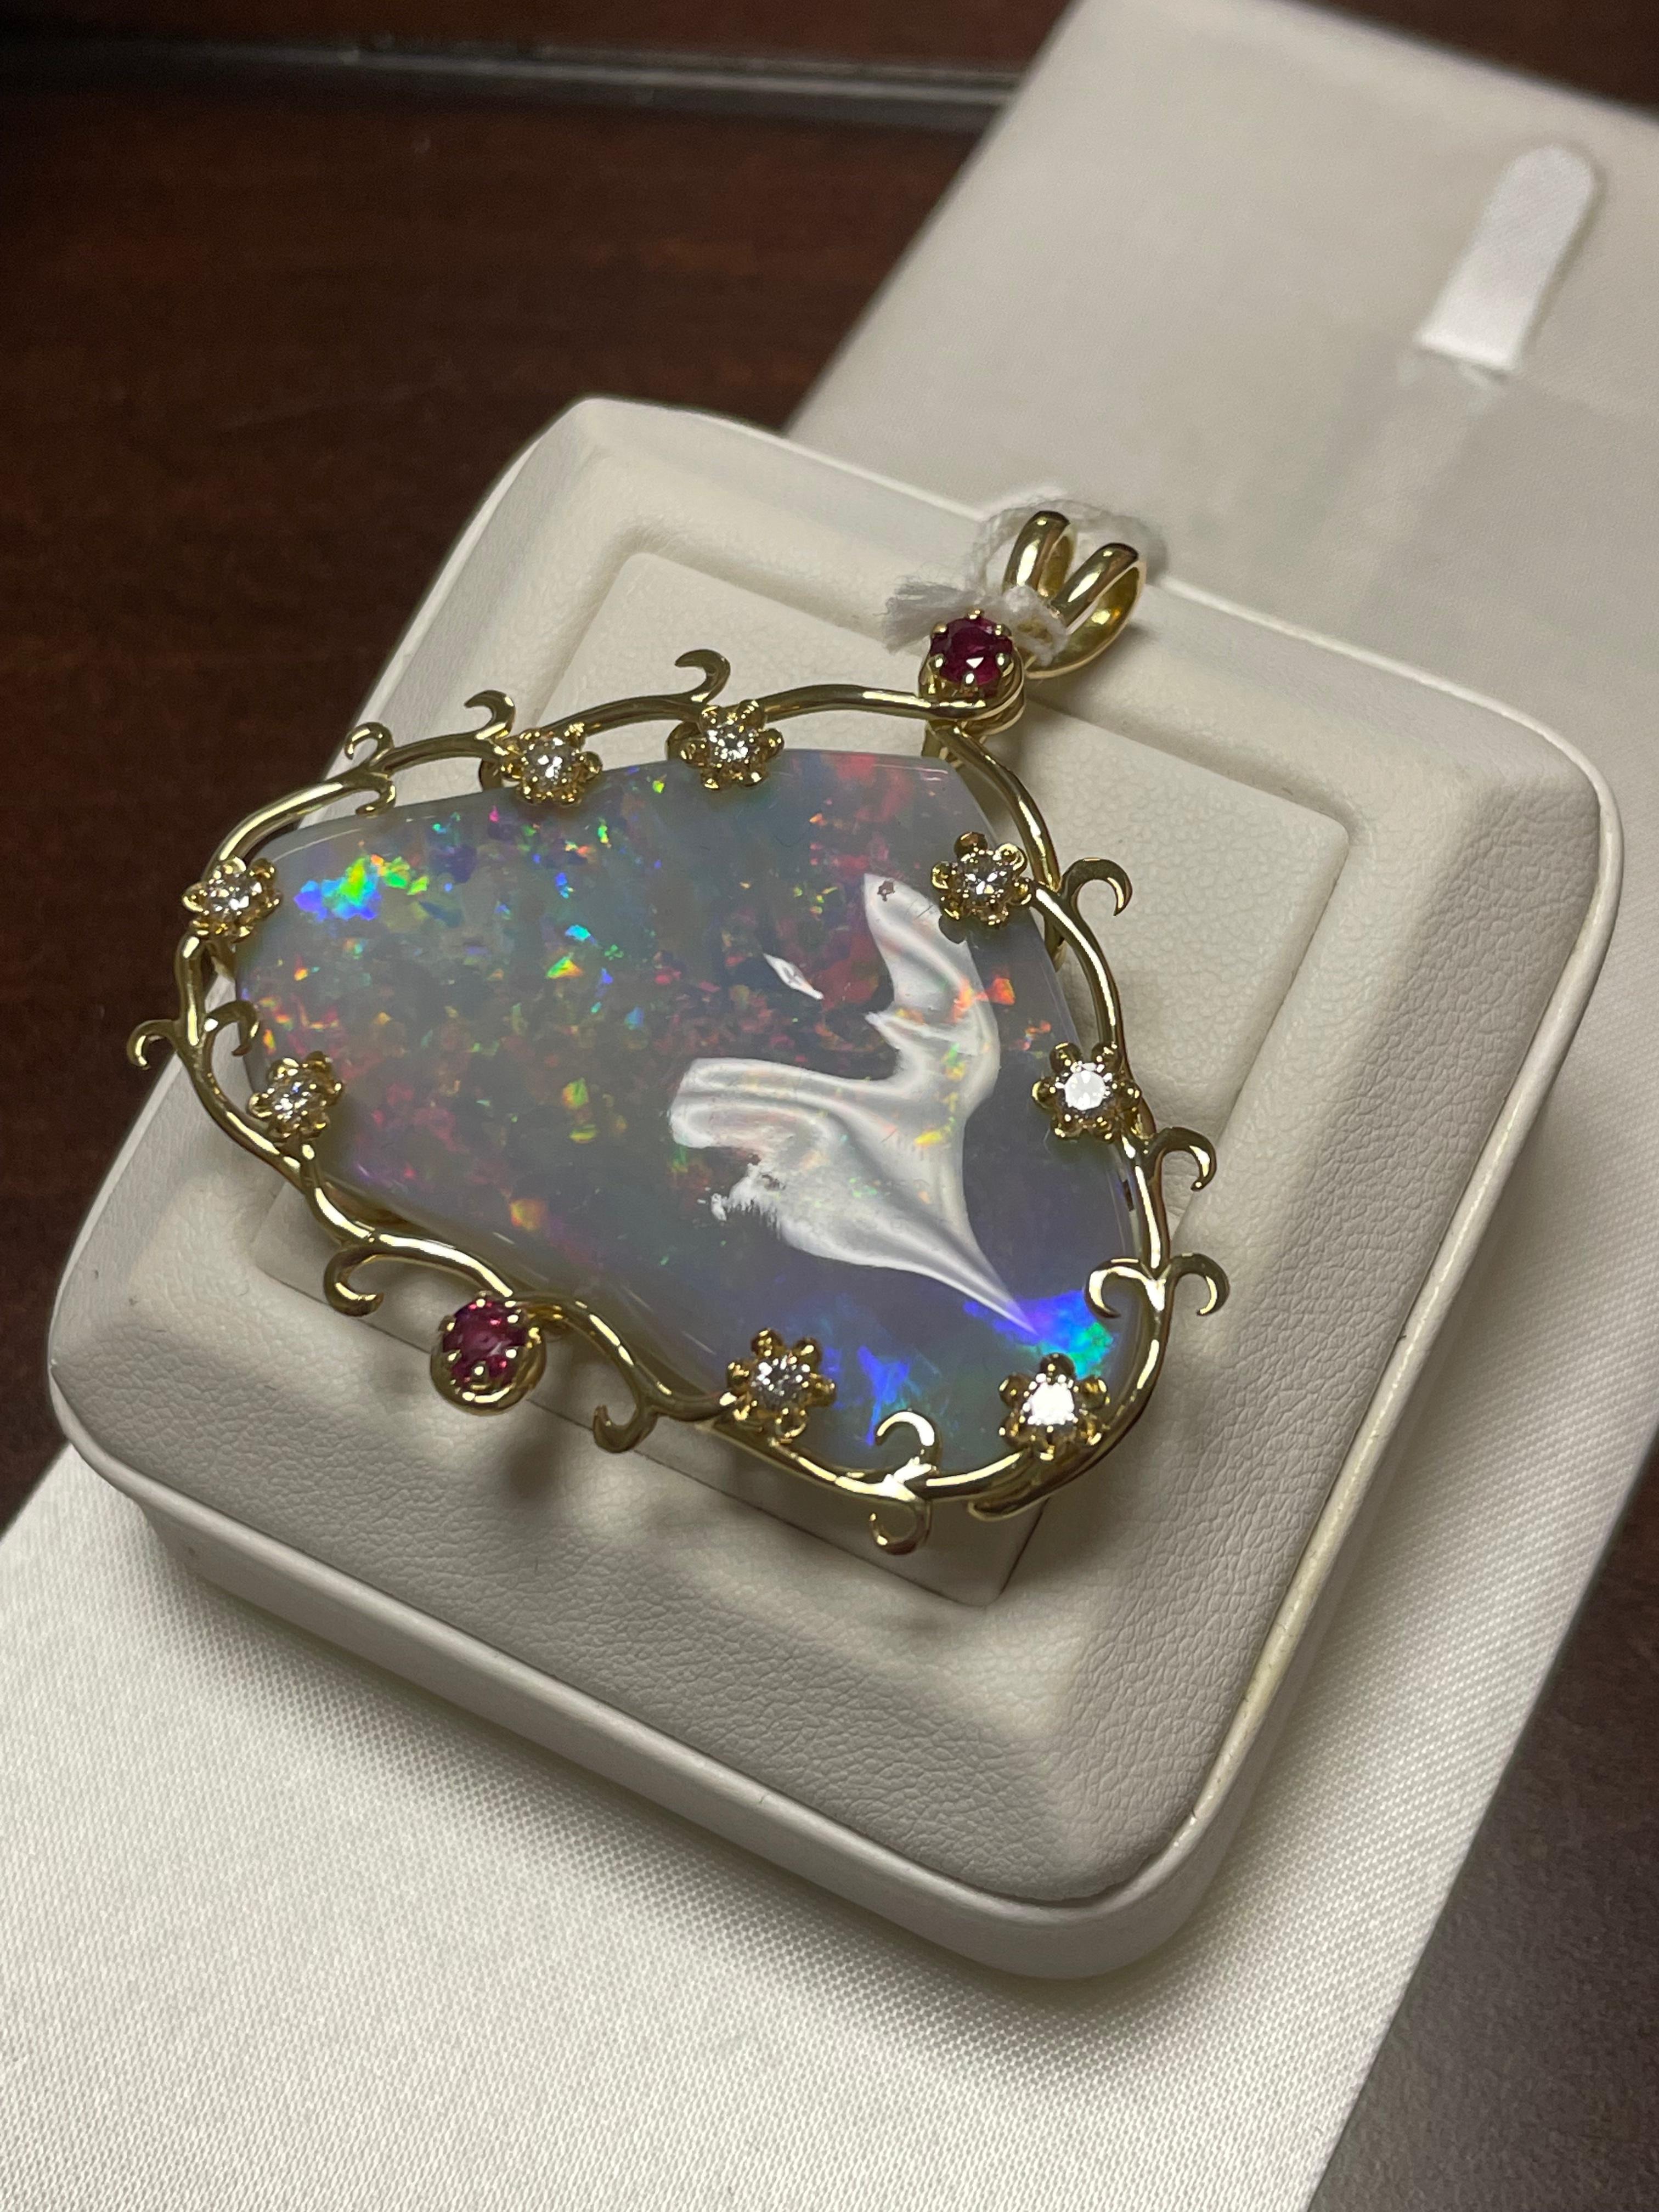 One lady's opal, diamonds, and rubies pendant.  Opal is semi-crystal and multicolor with dull saturation scale.  Includes pinfire pattern and din brightness of fire. Cut into cabochon shape and freeform.  Measurements of opal are 48.0 x 26.0. Eight